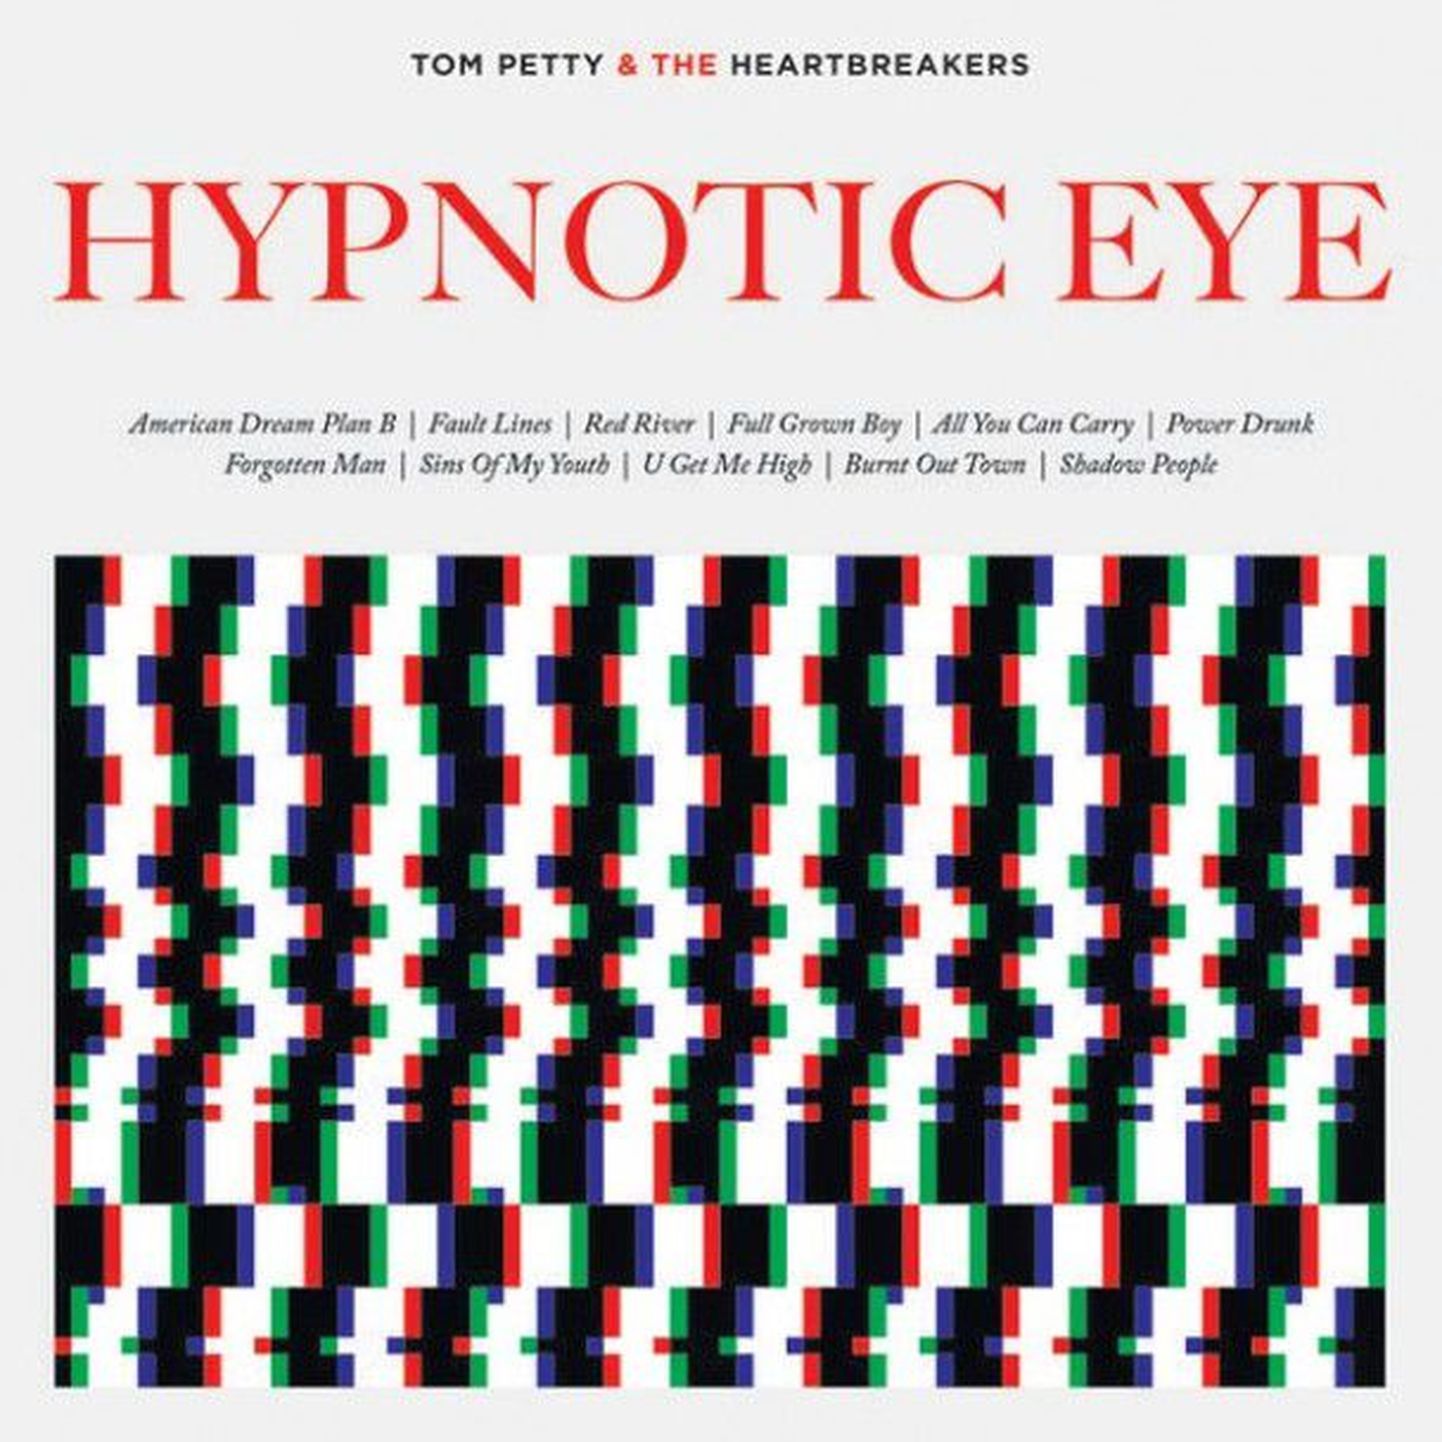 Tom Petty and the Heartbreakers- Hypnotic Eye